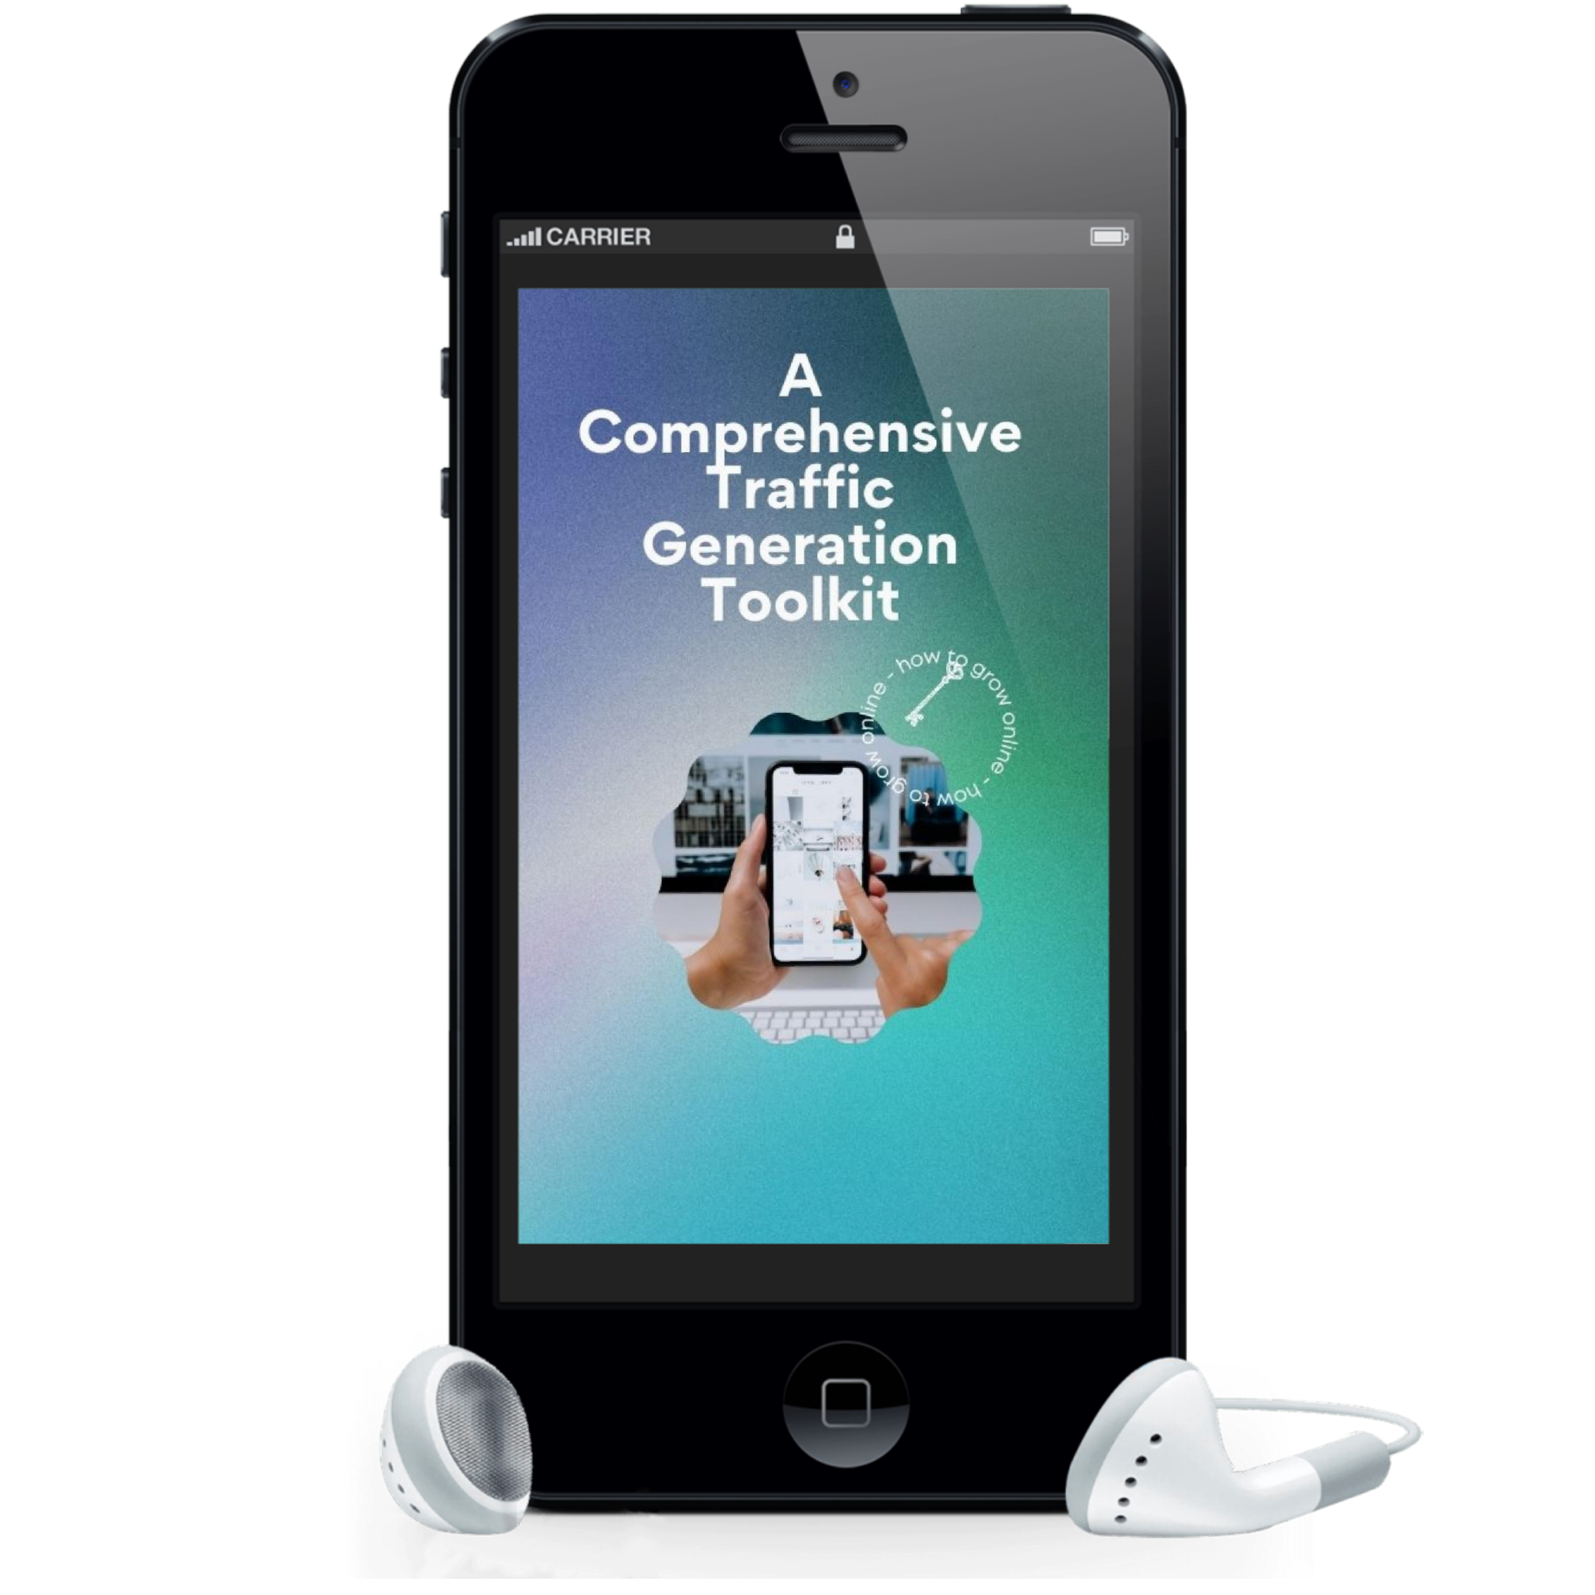 A Comprehensive Traffic Generation Toolkit